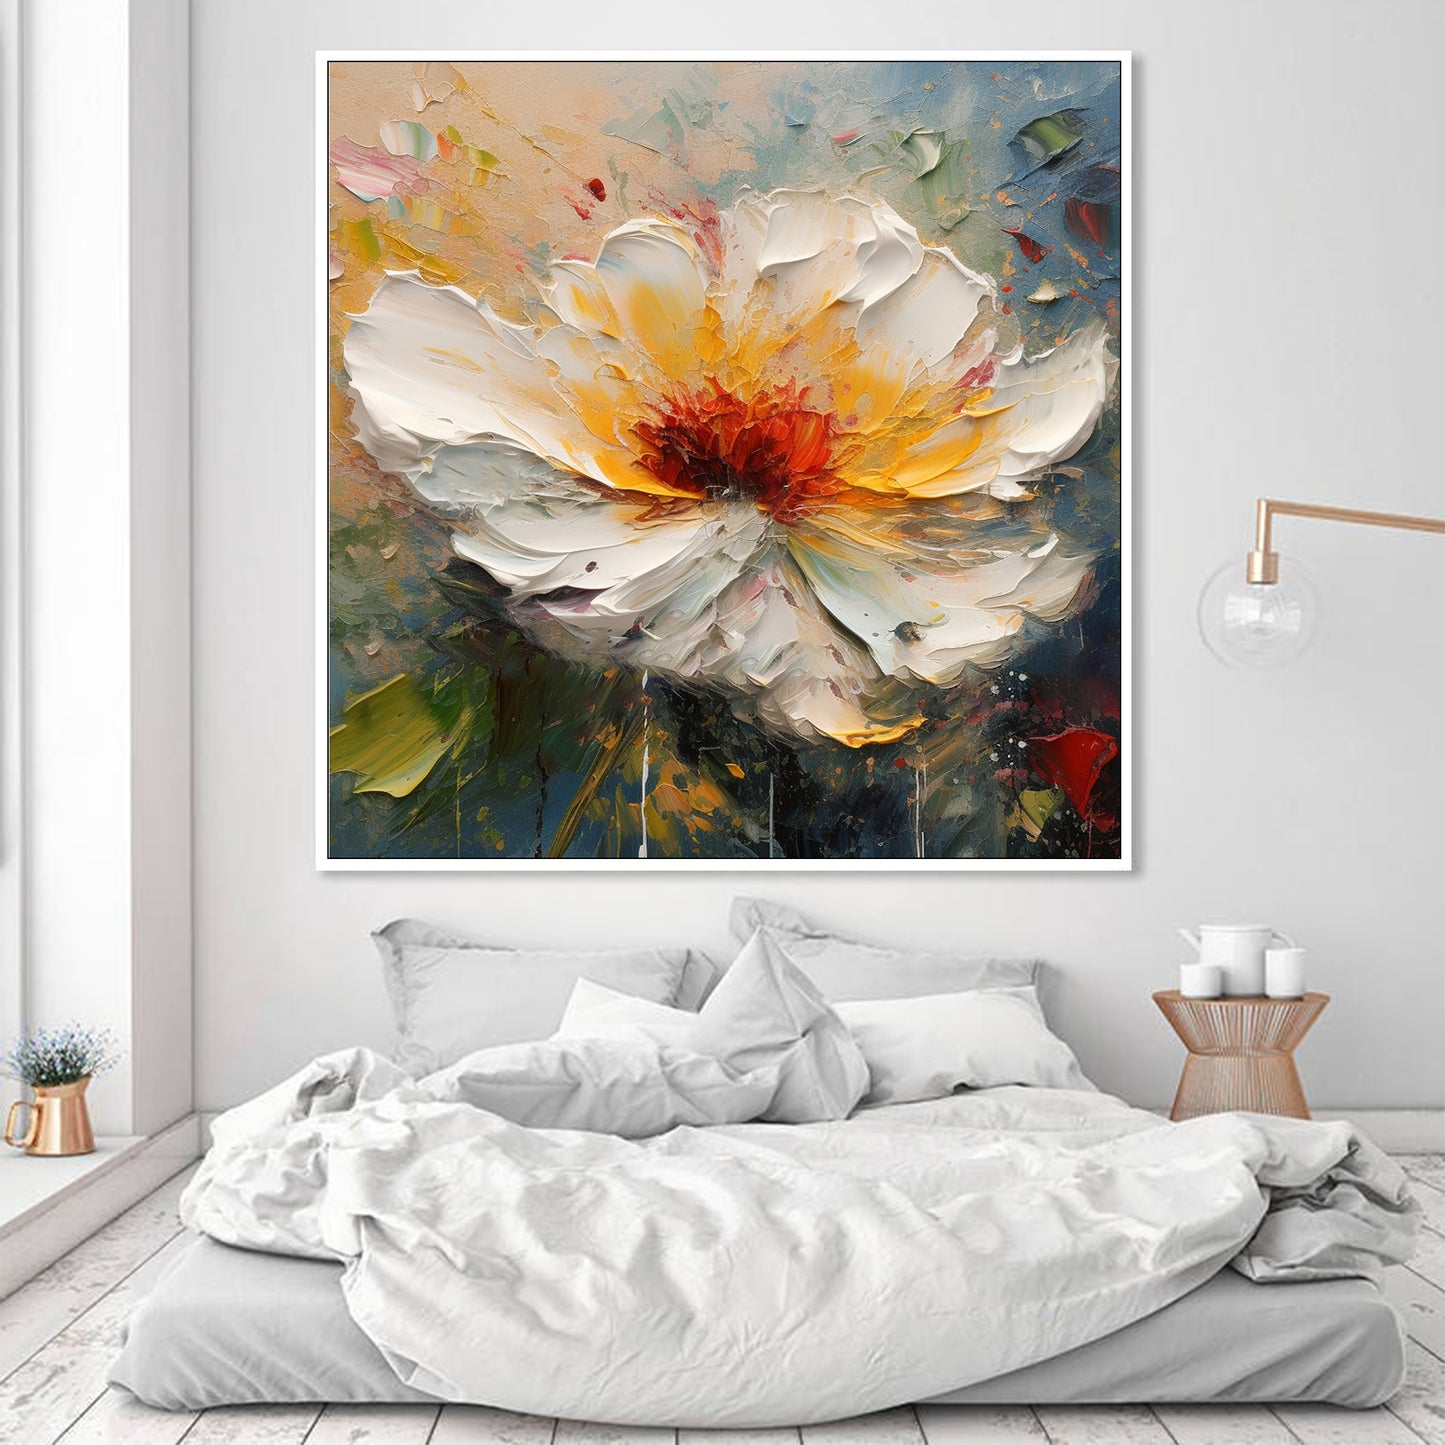 Abstract 3D Flower Oil Painting Texture Floral Wall Art Minimalist Living Room Decor Gift F0416A2311